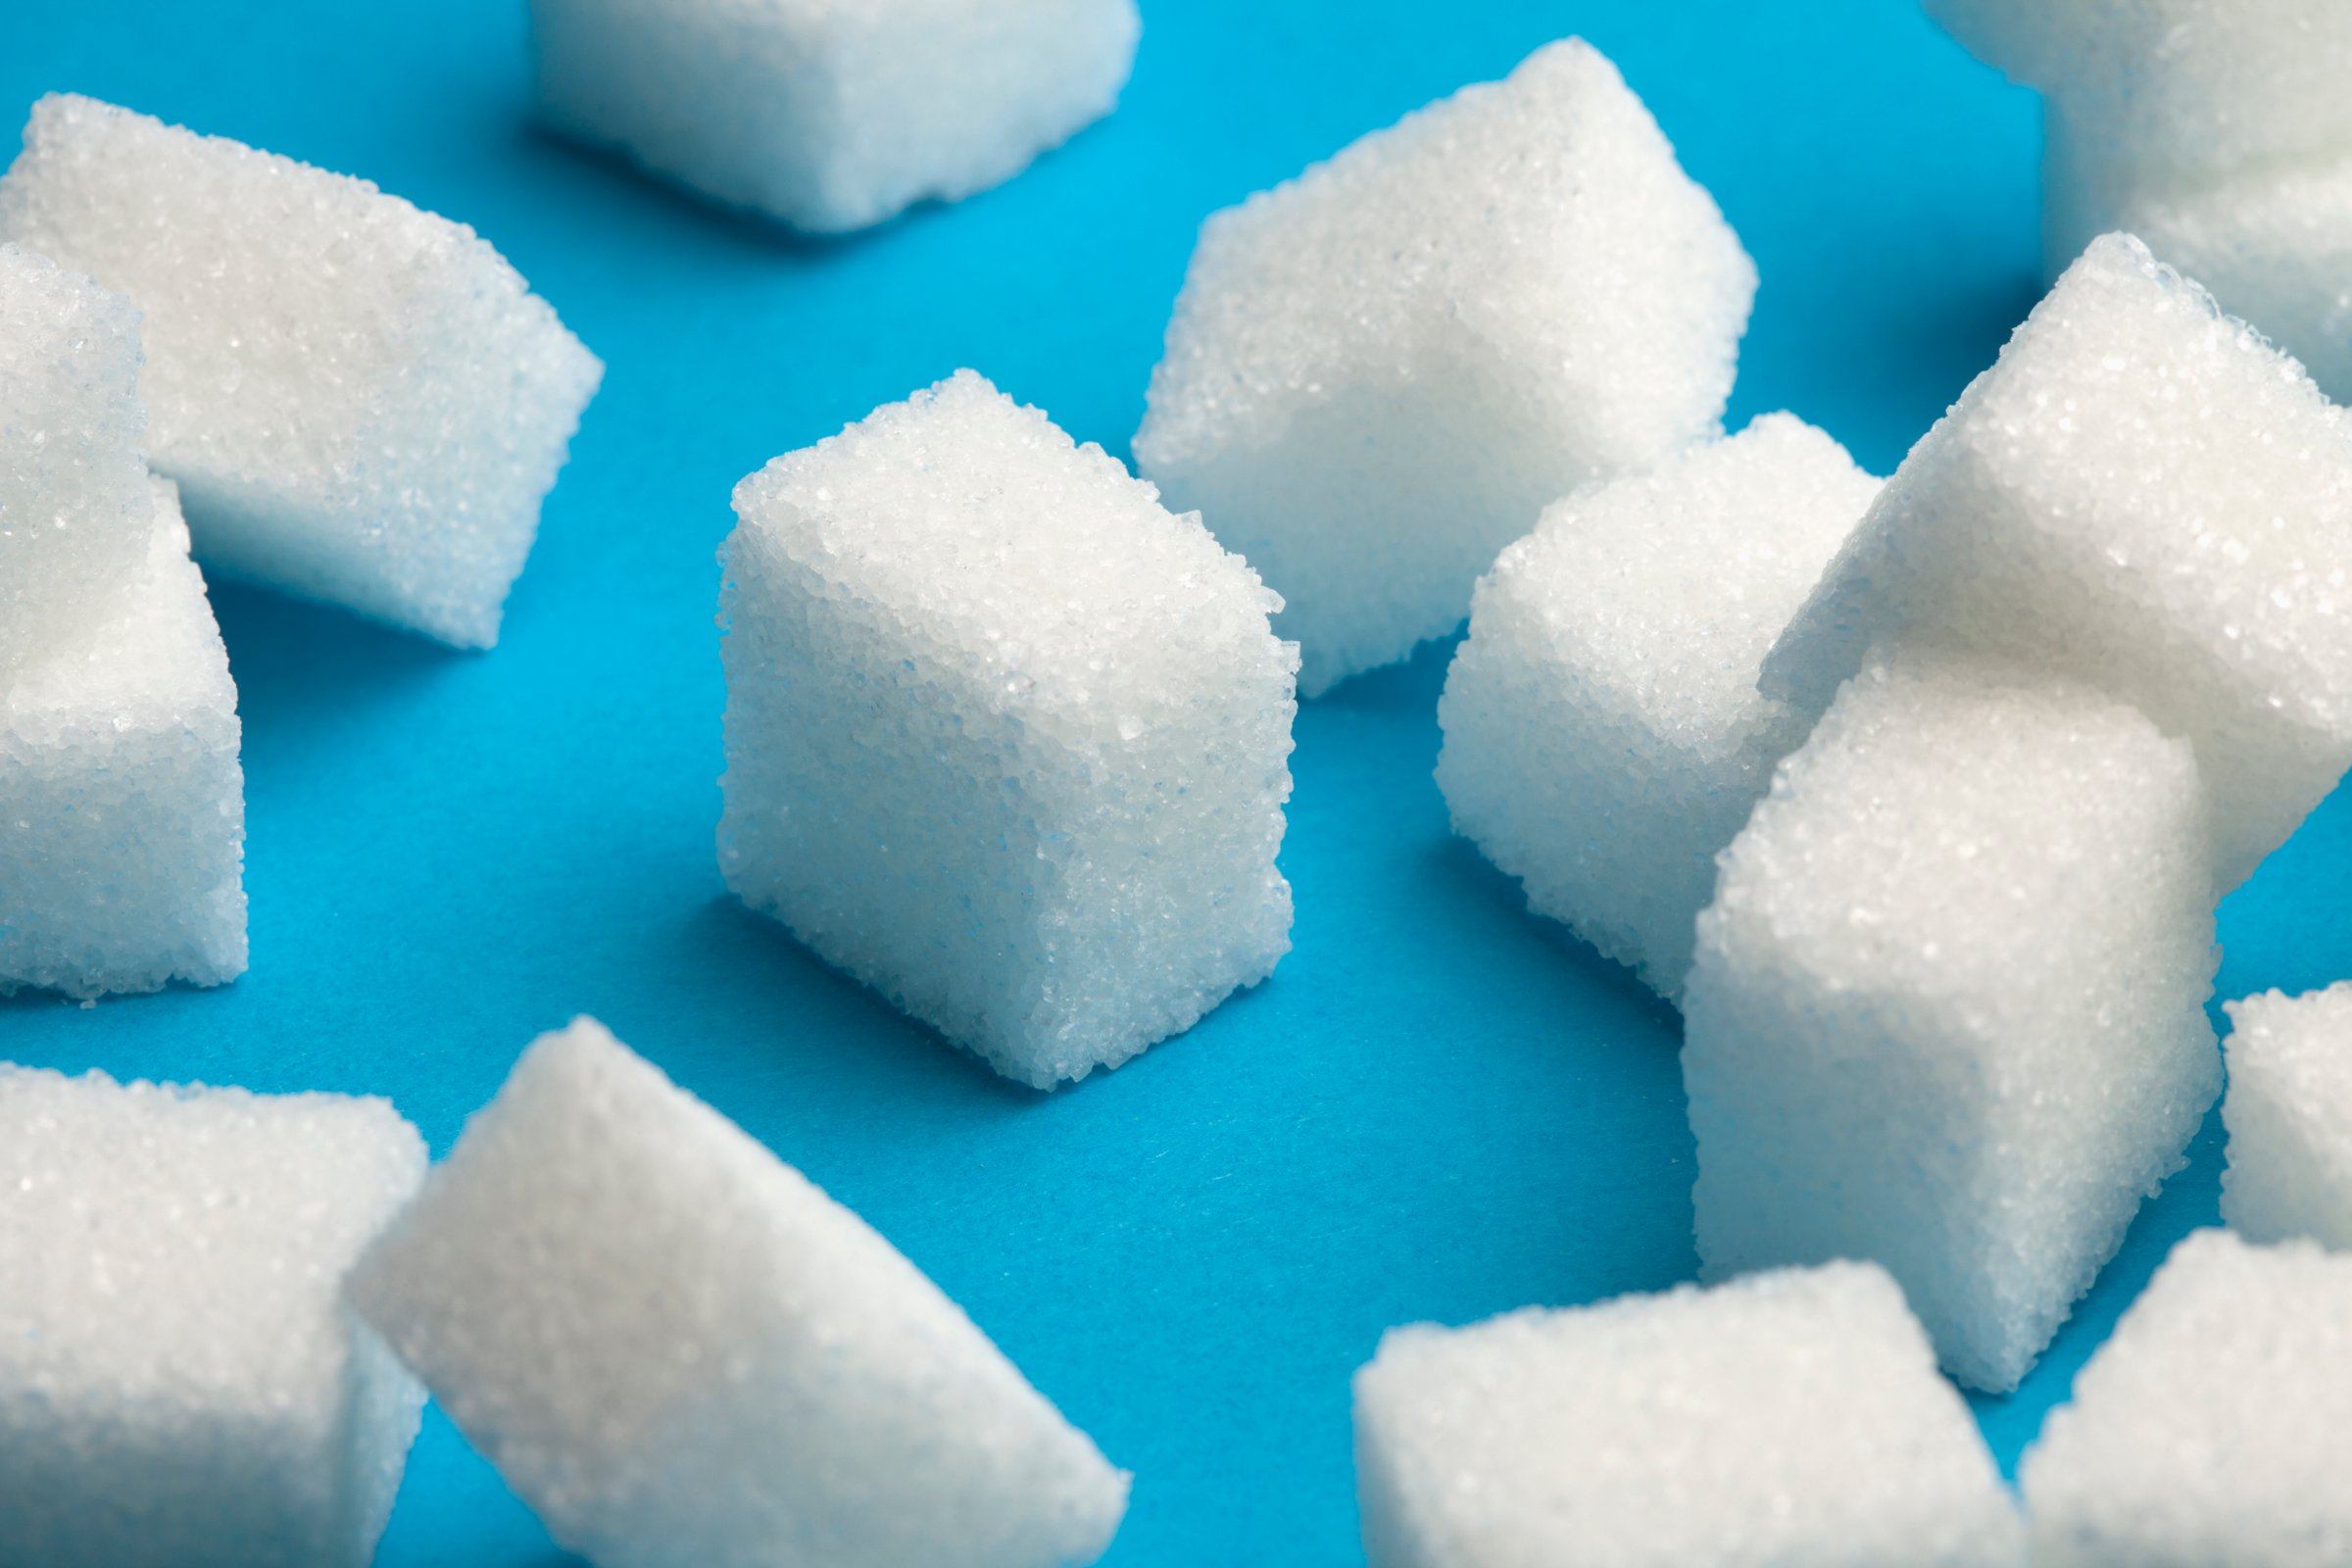 Sugar cubes with one standing out in the middle